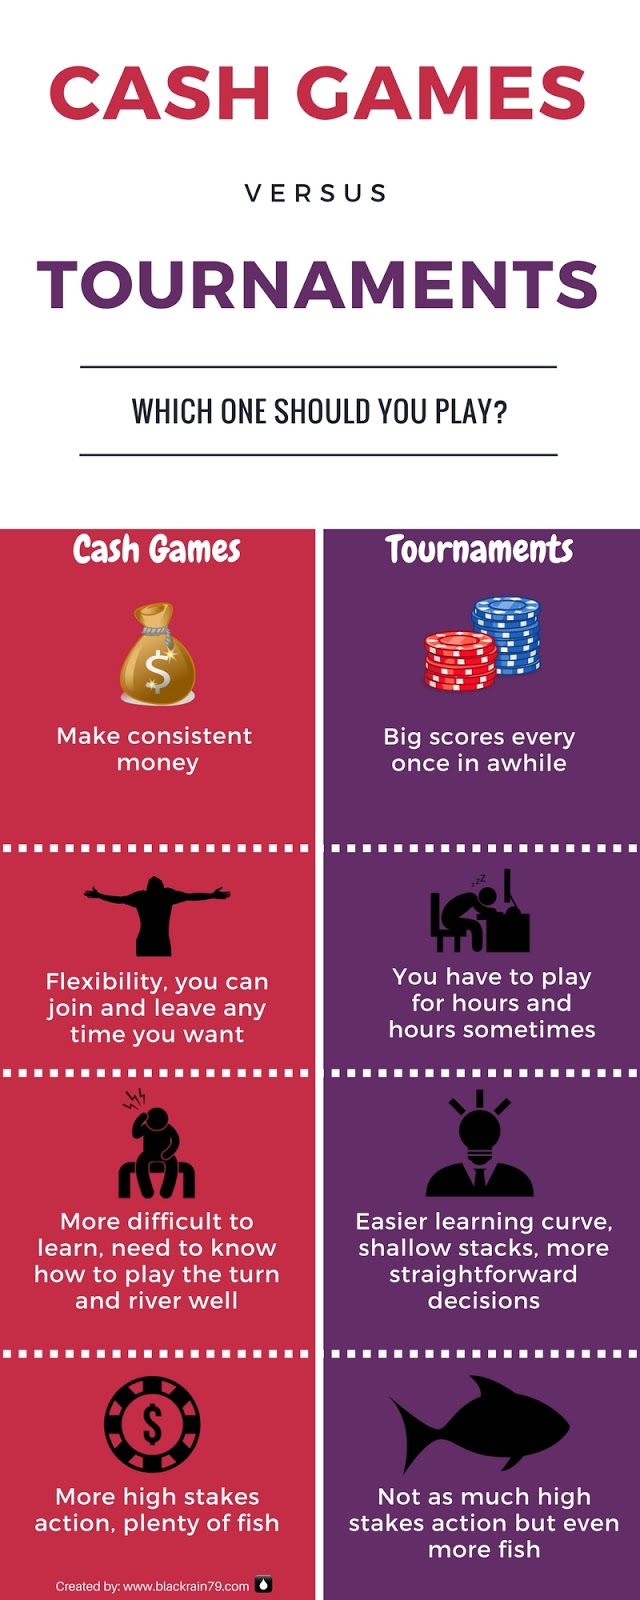 Is there a difference between cash games and tournaments?